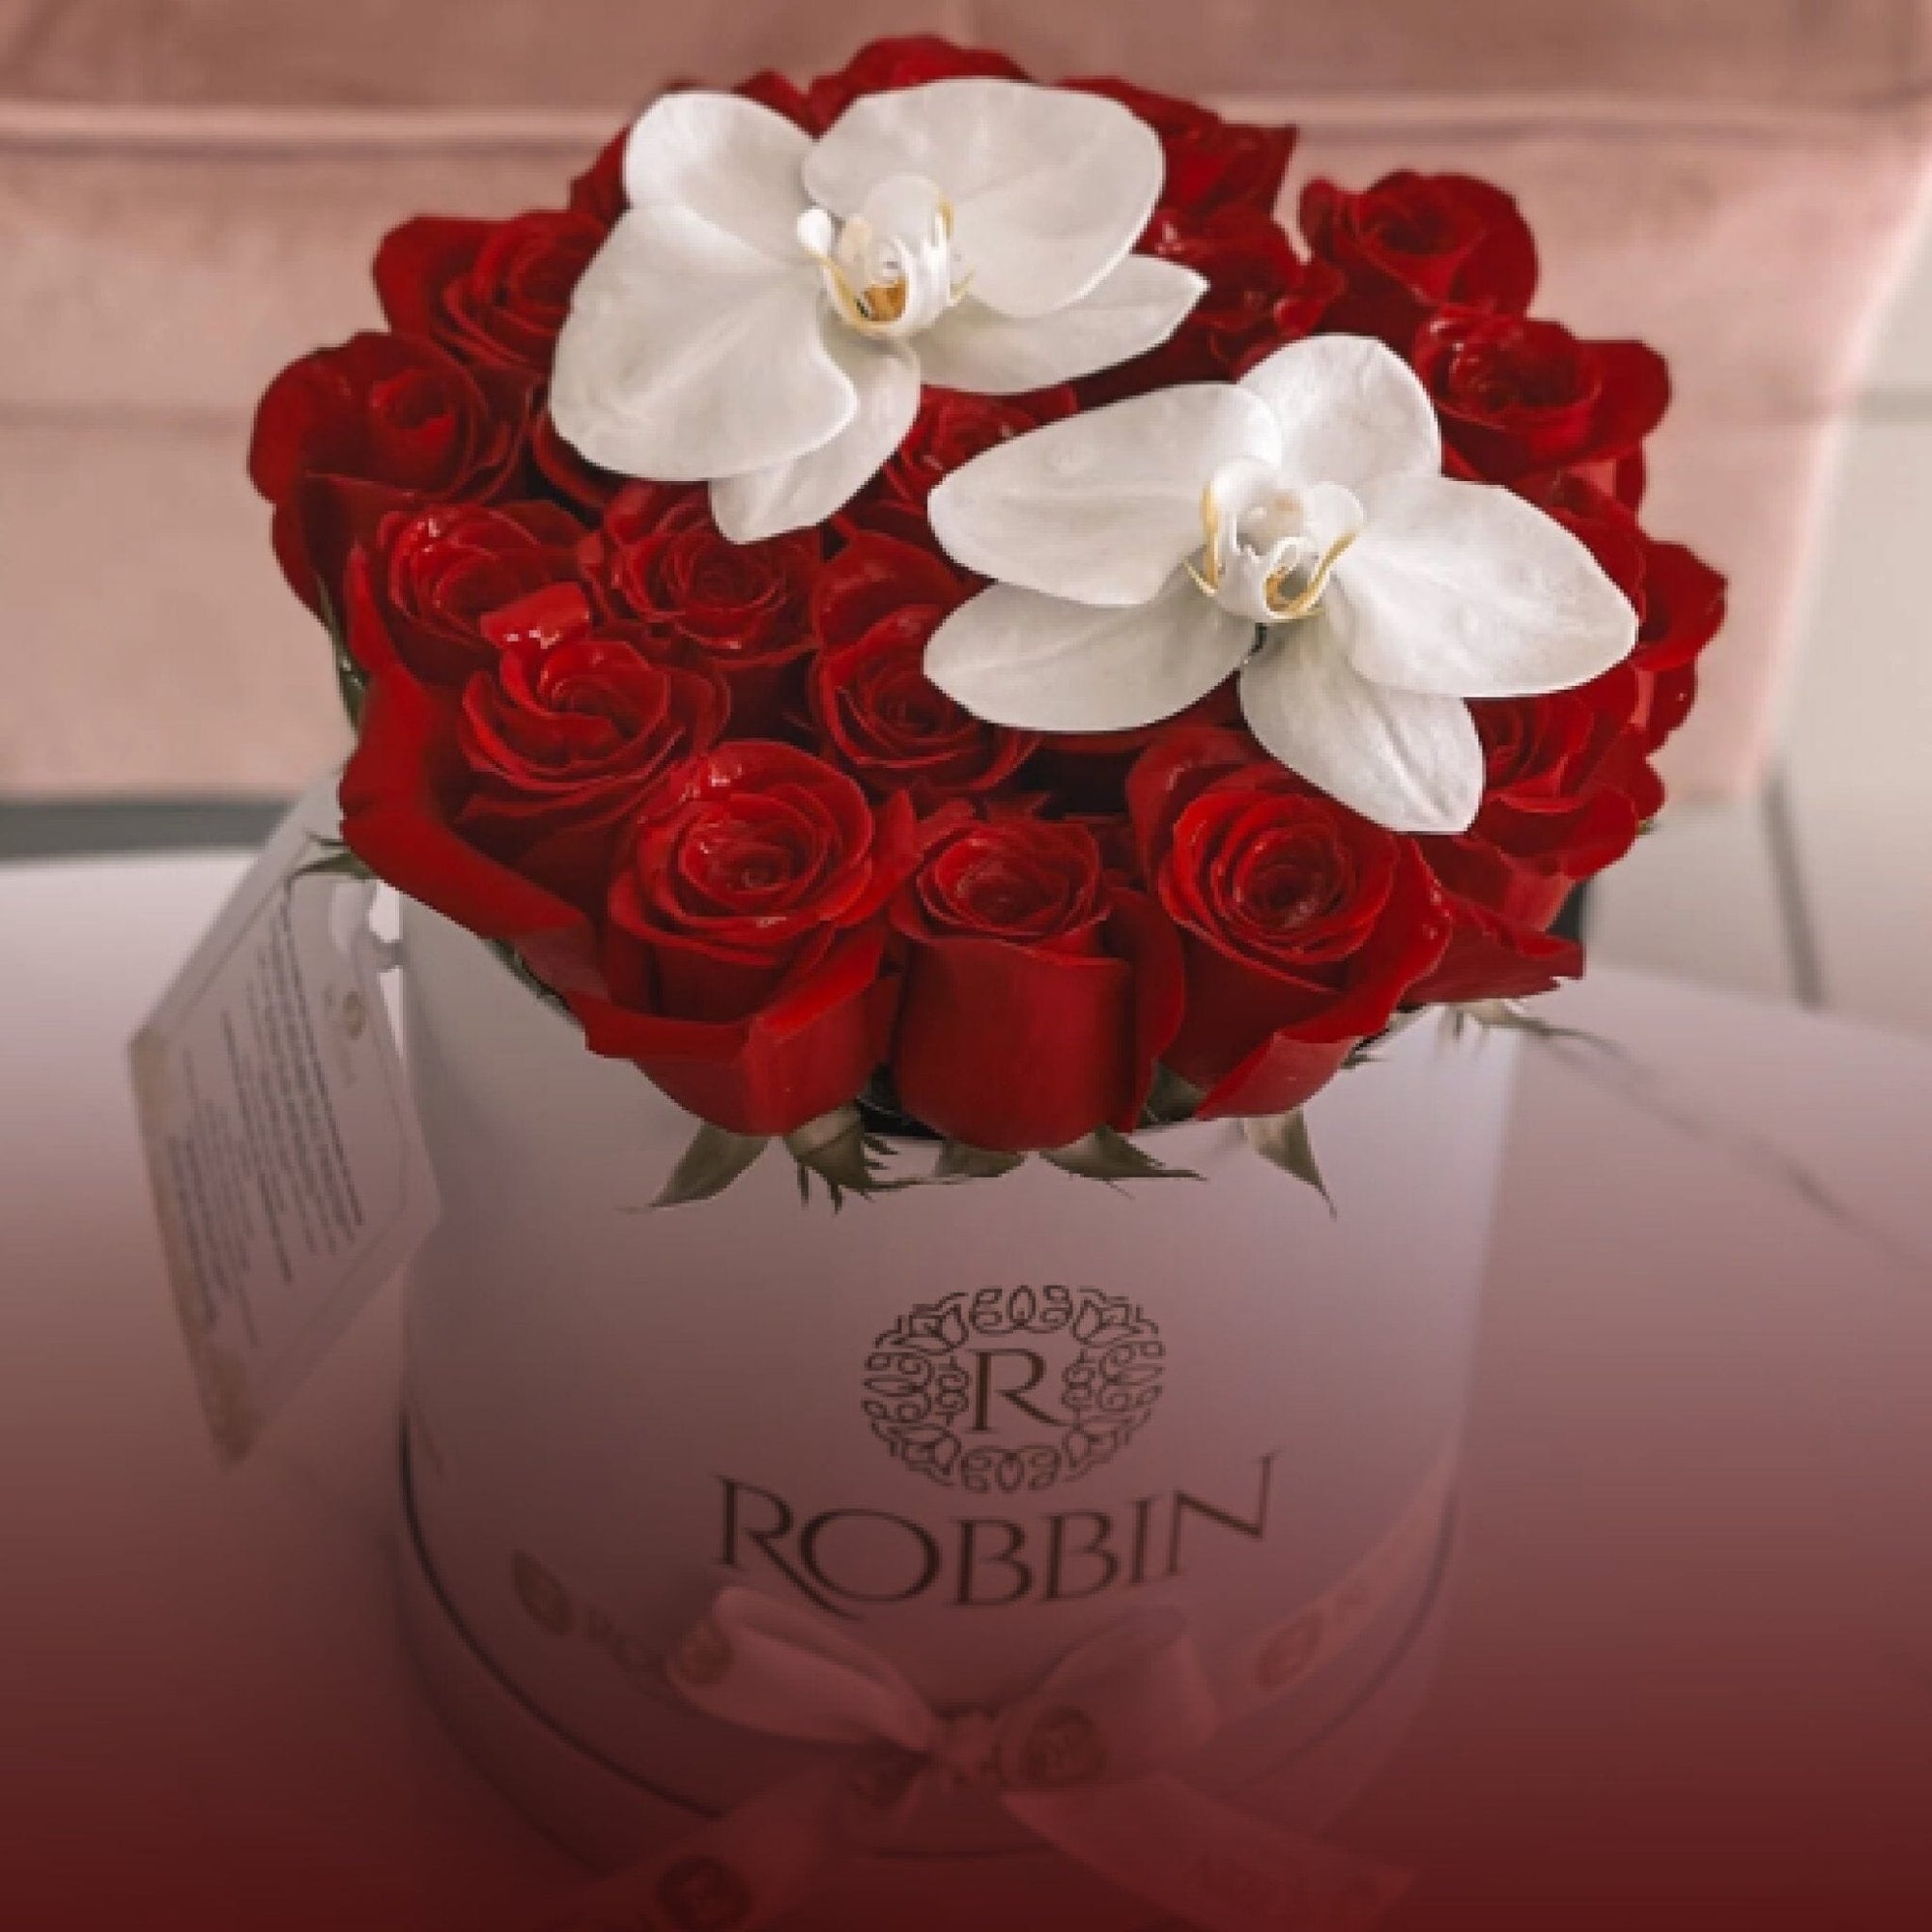 Orchid Flower Arrangements - For Delivery in Miami